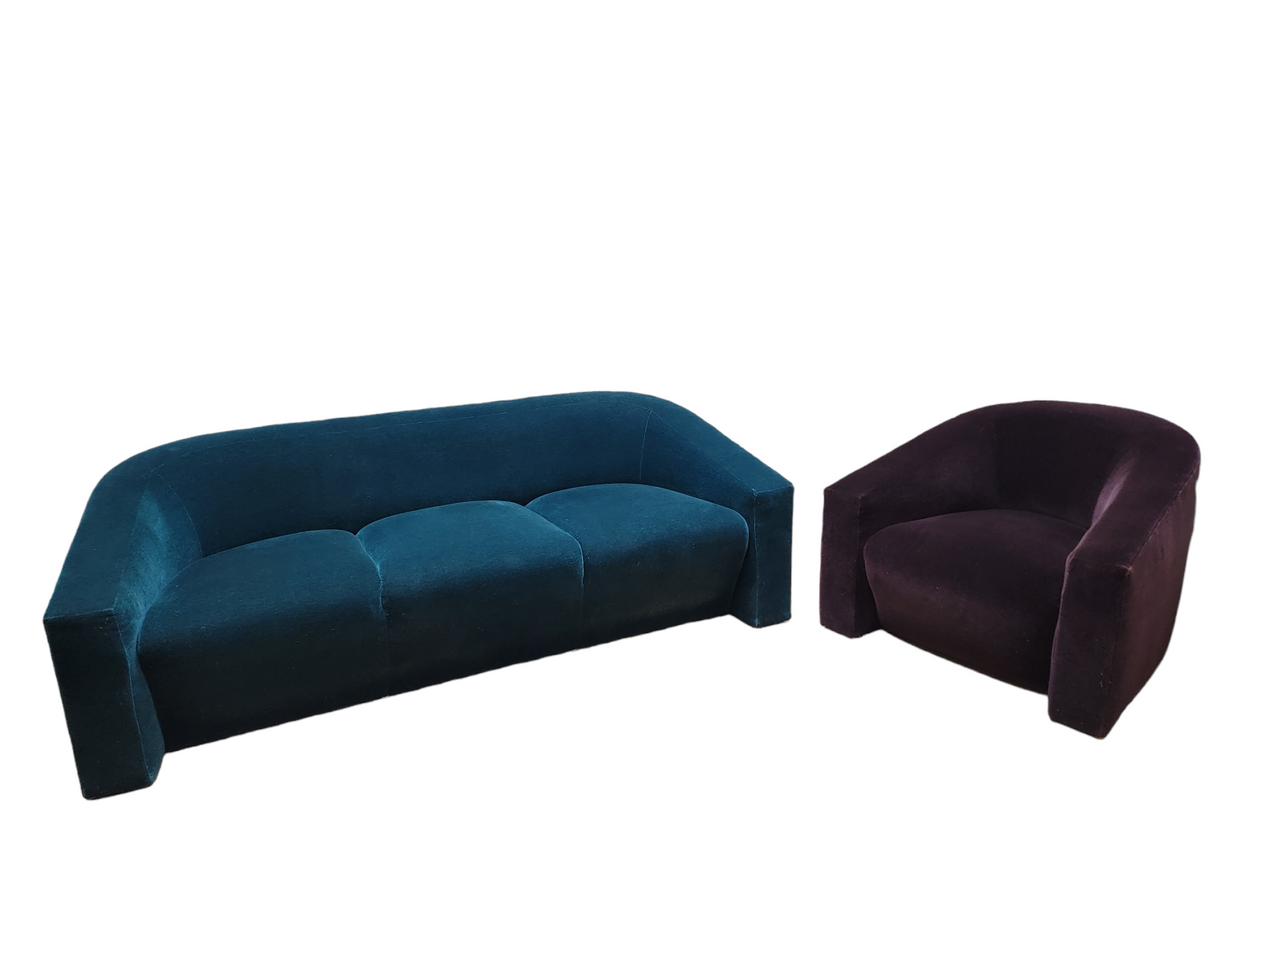 Vintage Contemporary Modern Donghia 3 Seat Curved Arm Sofa & Lounge Chair in Mohair - Set of 2